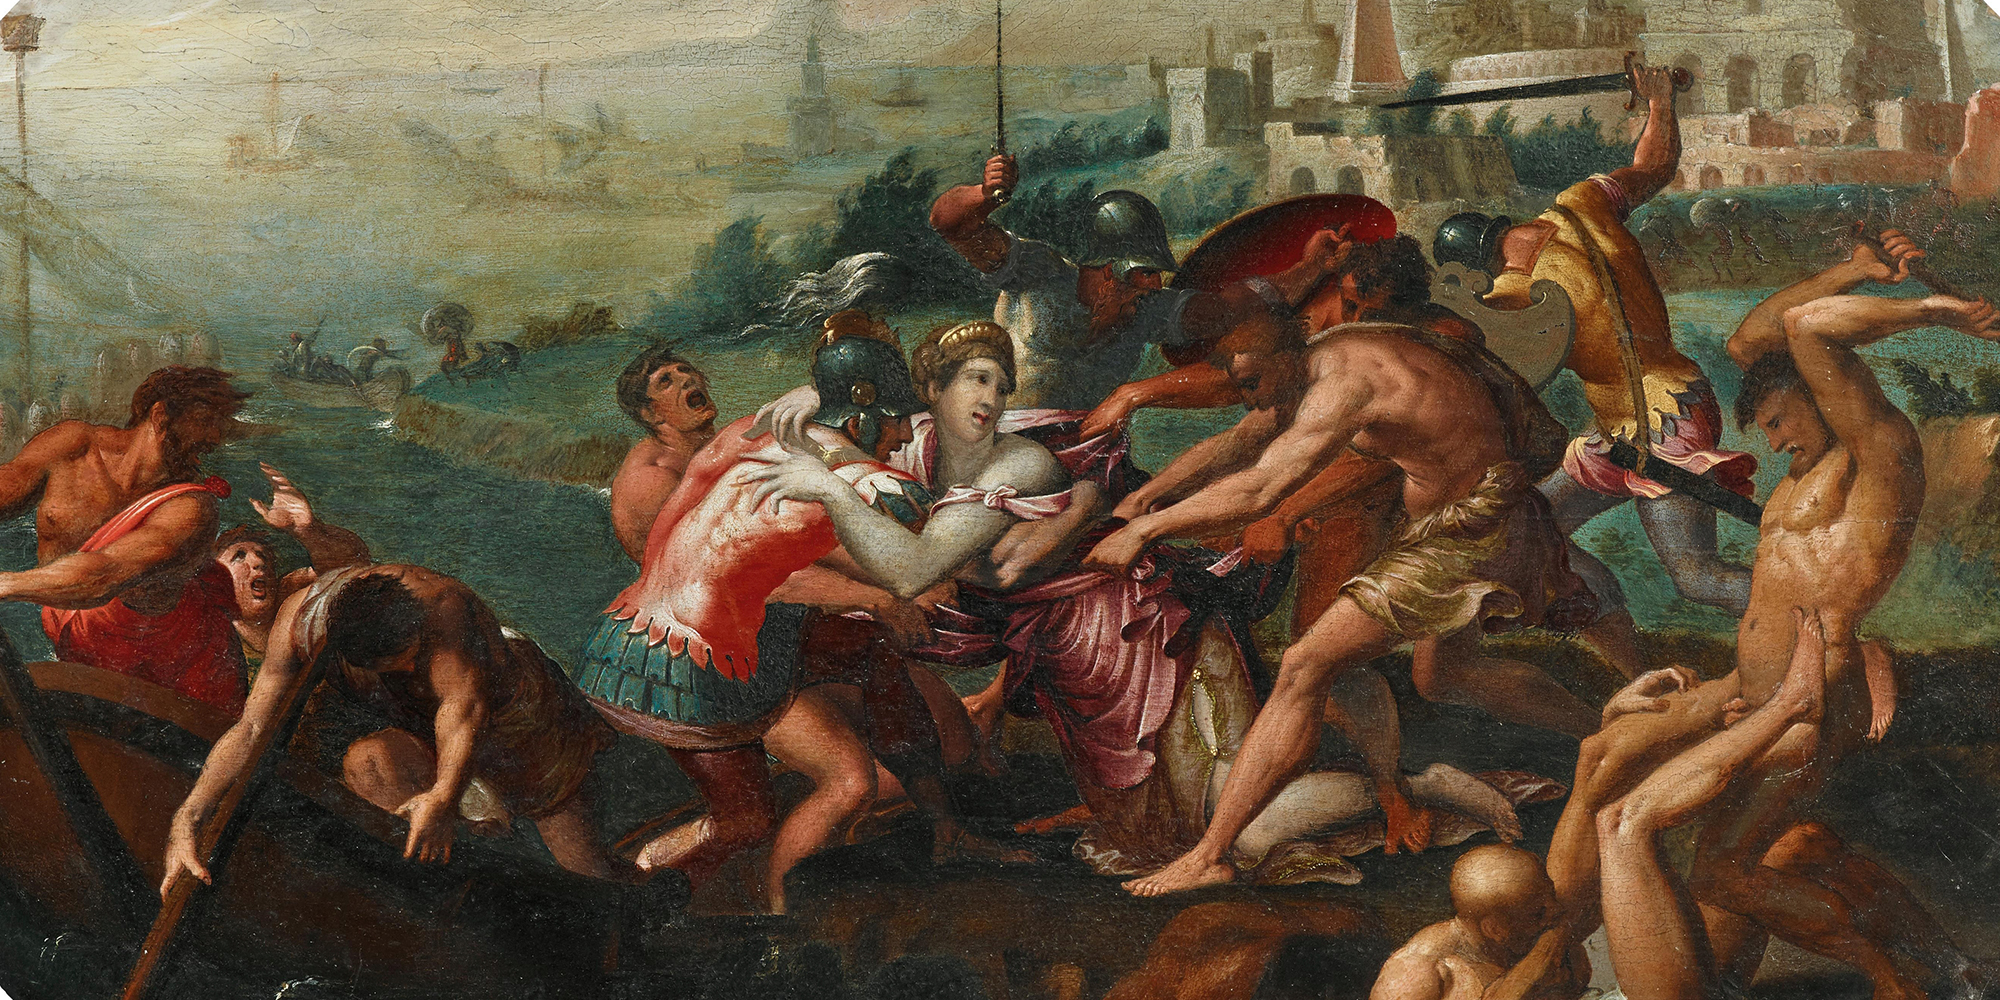 The abduction of Helen of Troy